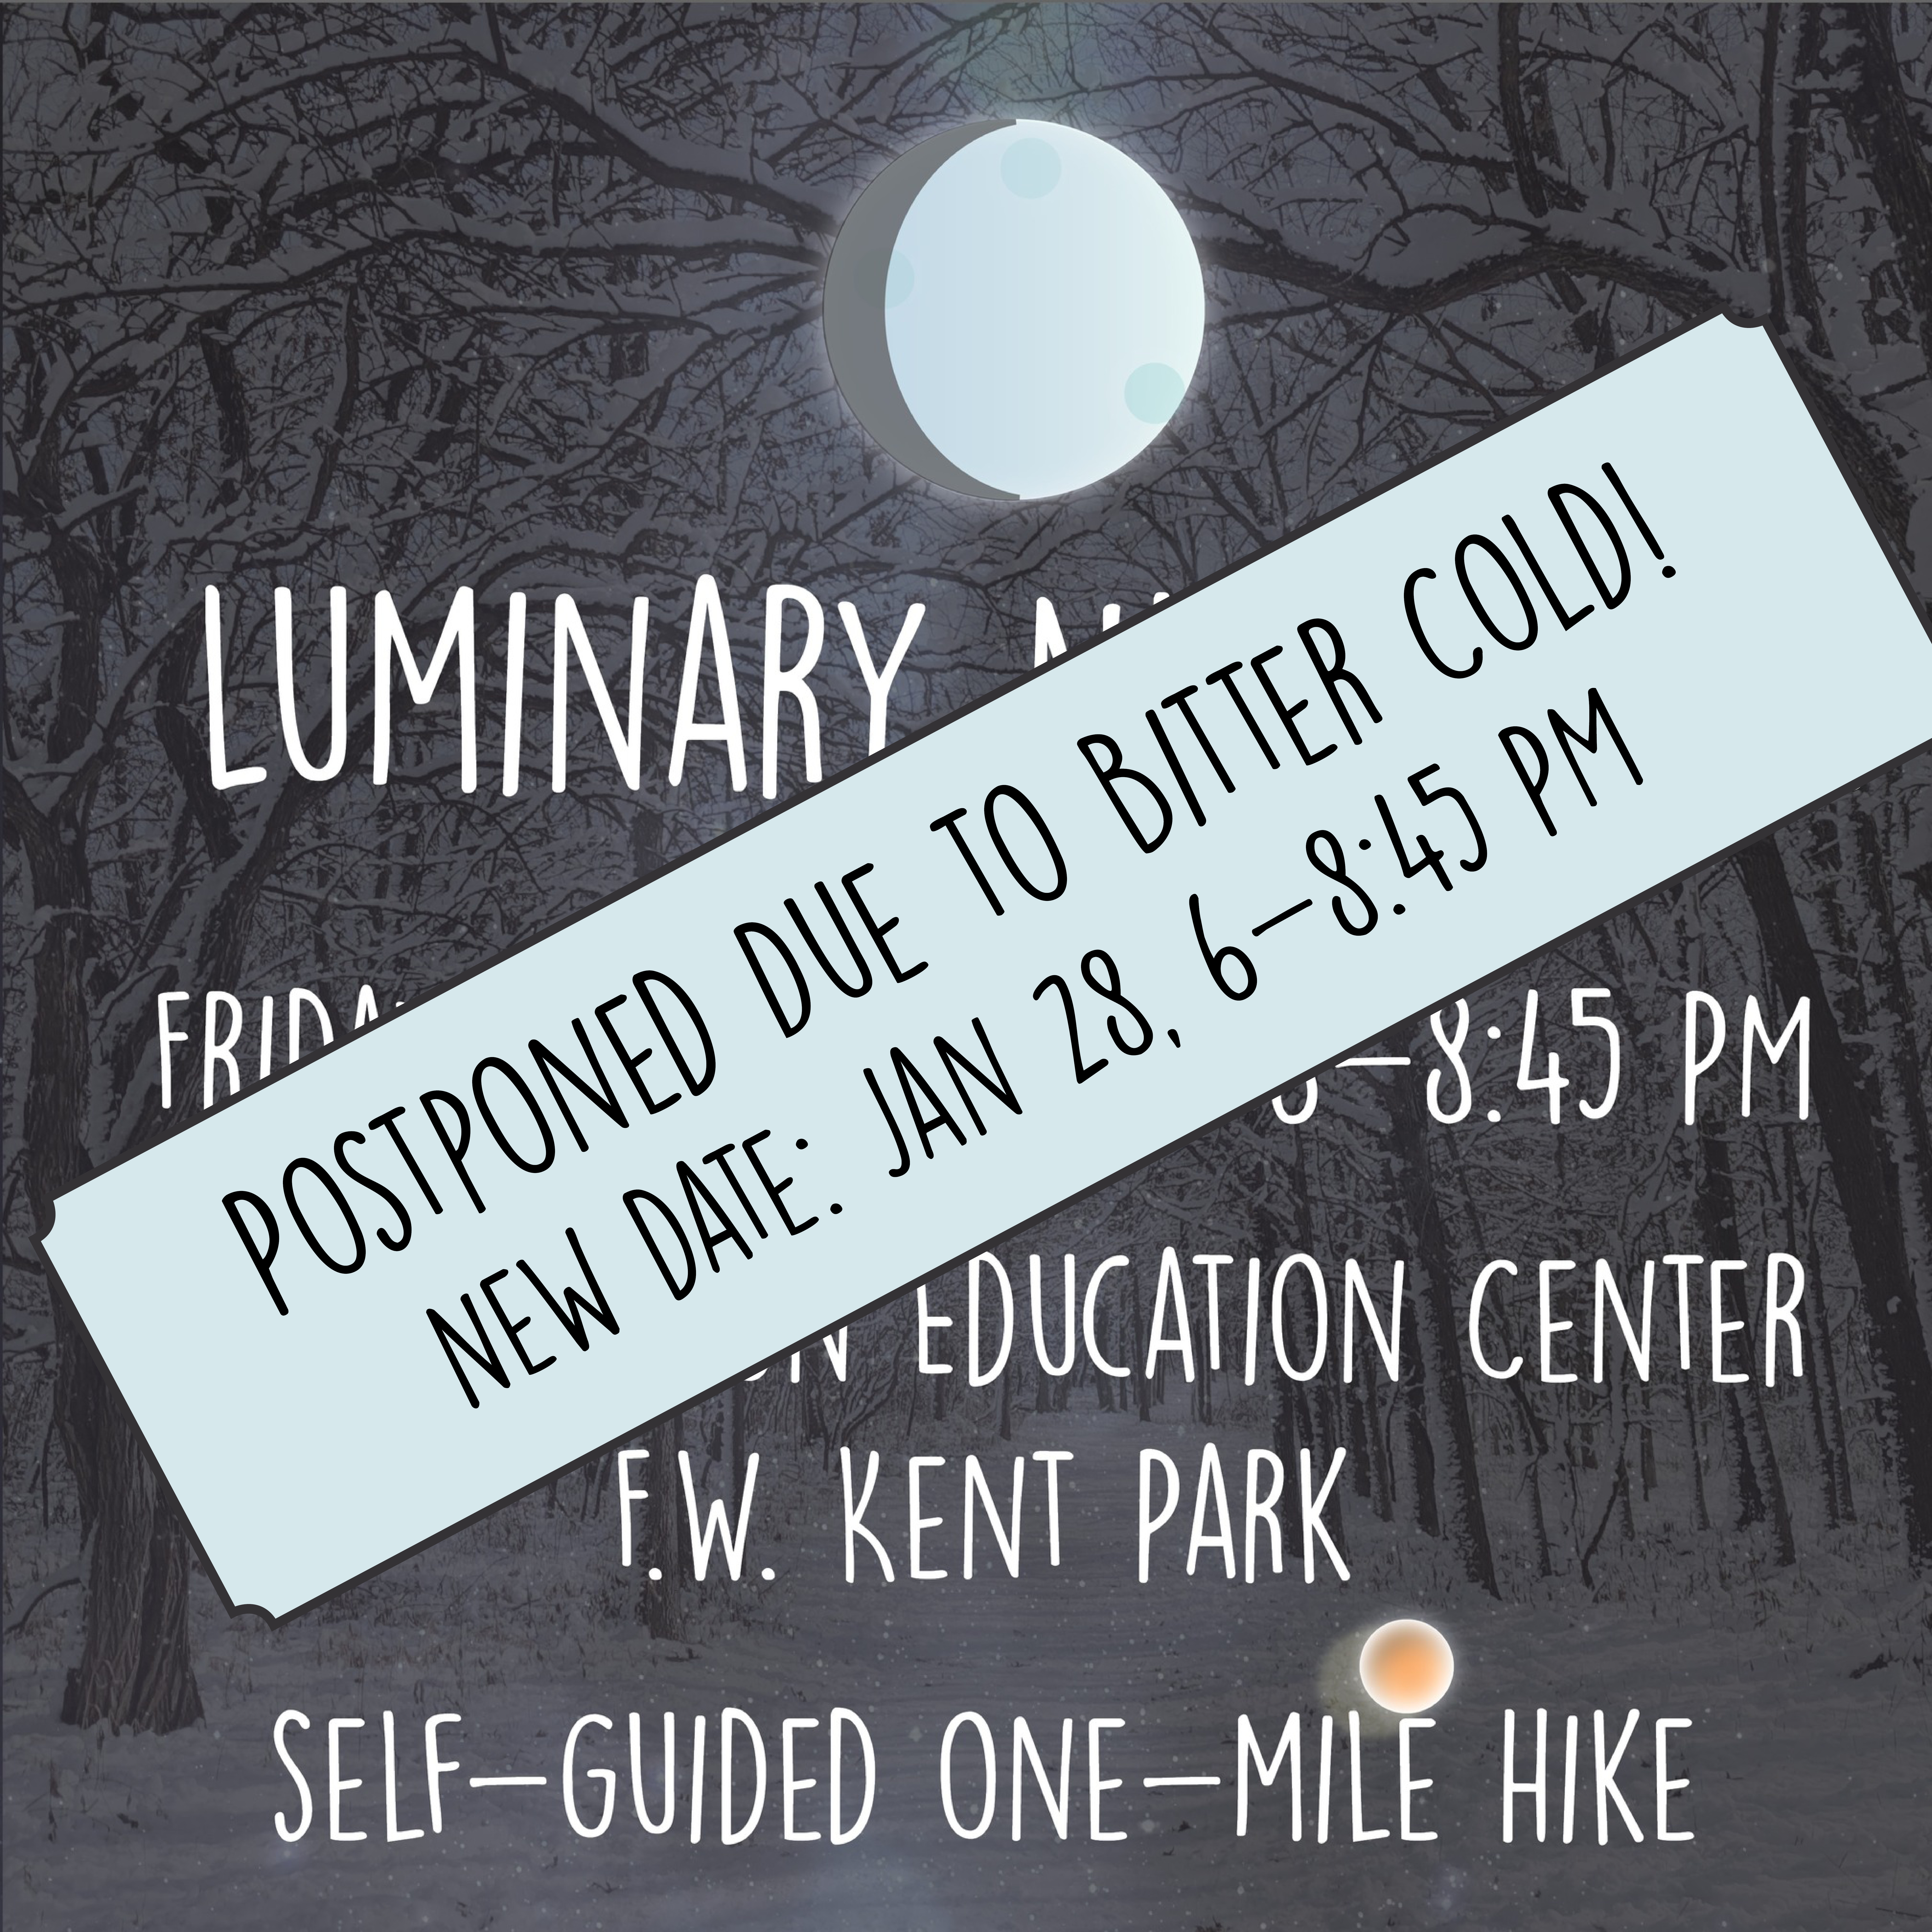 A notice that an event, a Luminary Night Hike, has been rescheduled from Jan 21 to Jan 28 2022 due to cold temperatures. 